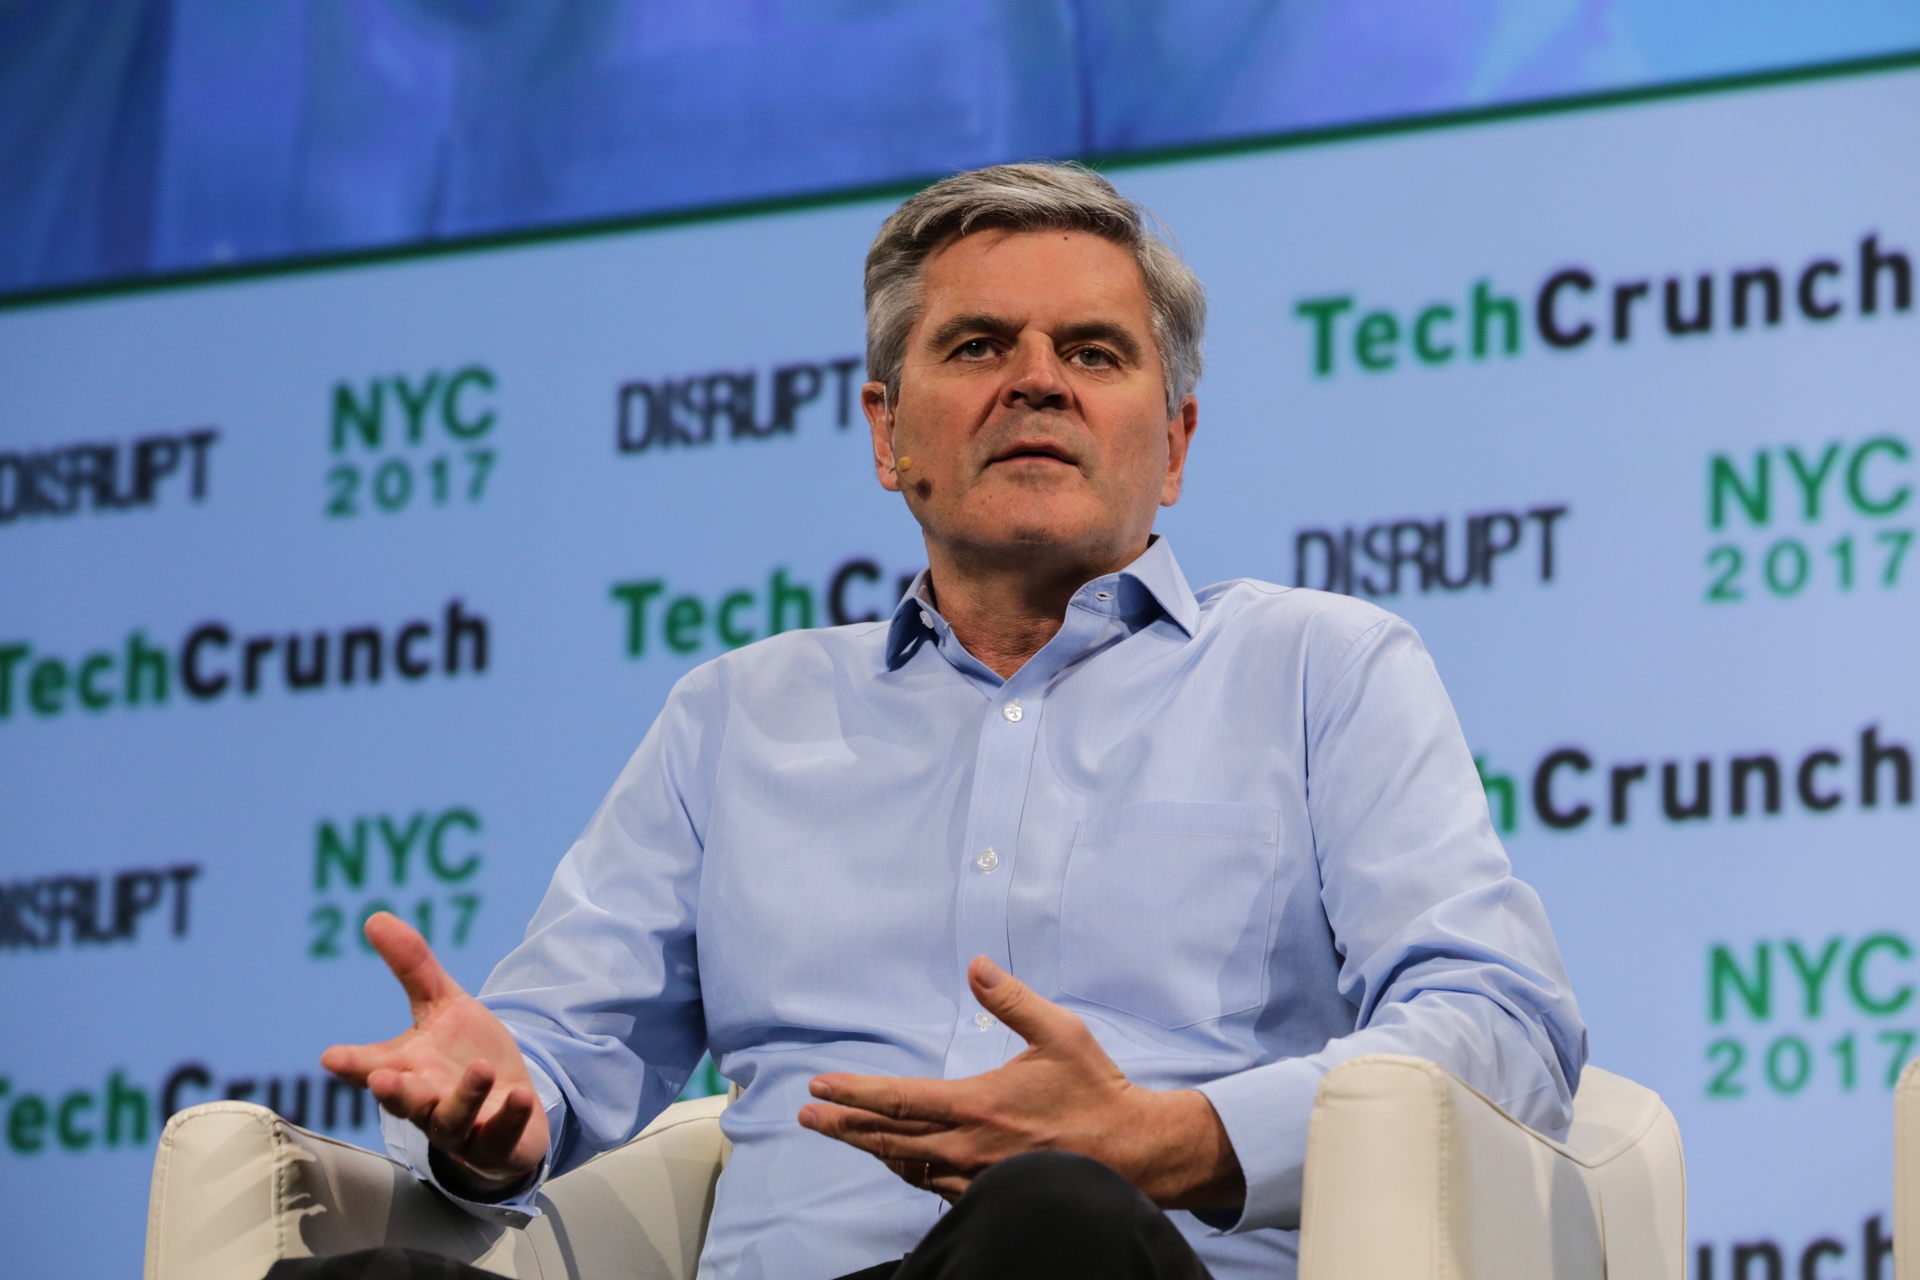 techcrunch.com - Connie Loizos - Steve Case is trying to make money with founders outside Silicon Valley; his plan is starting to work